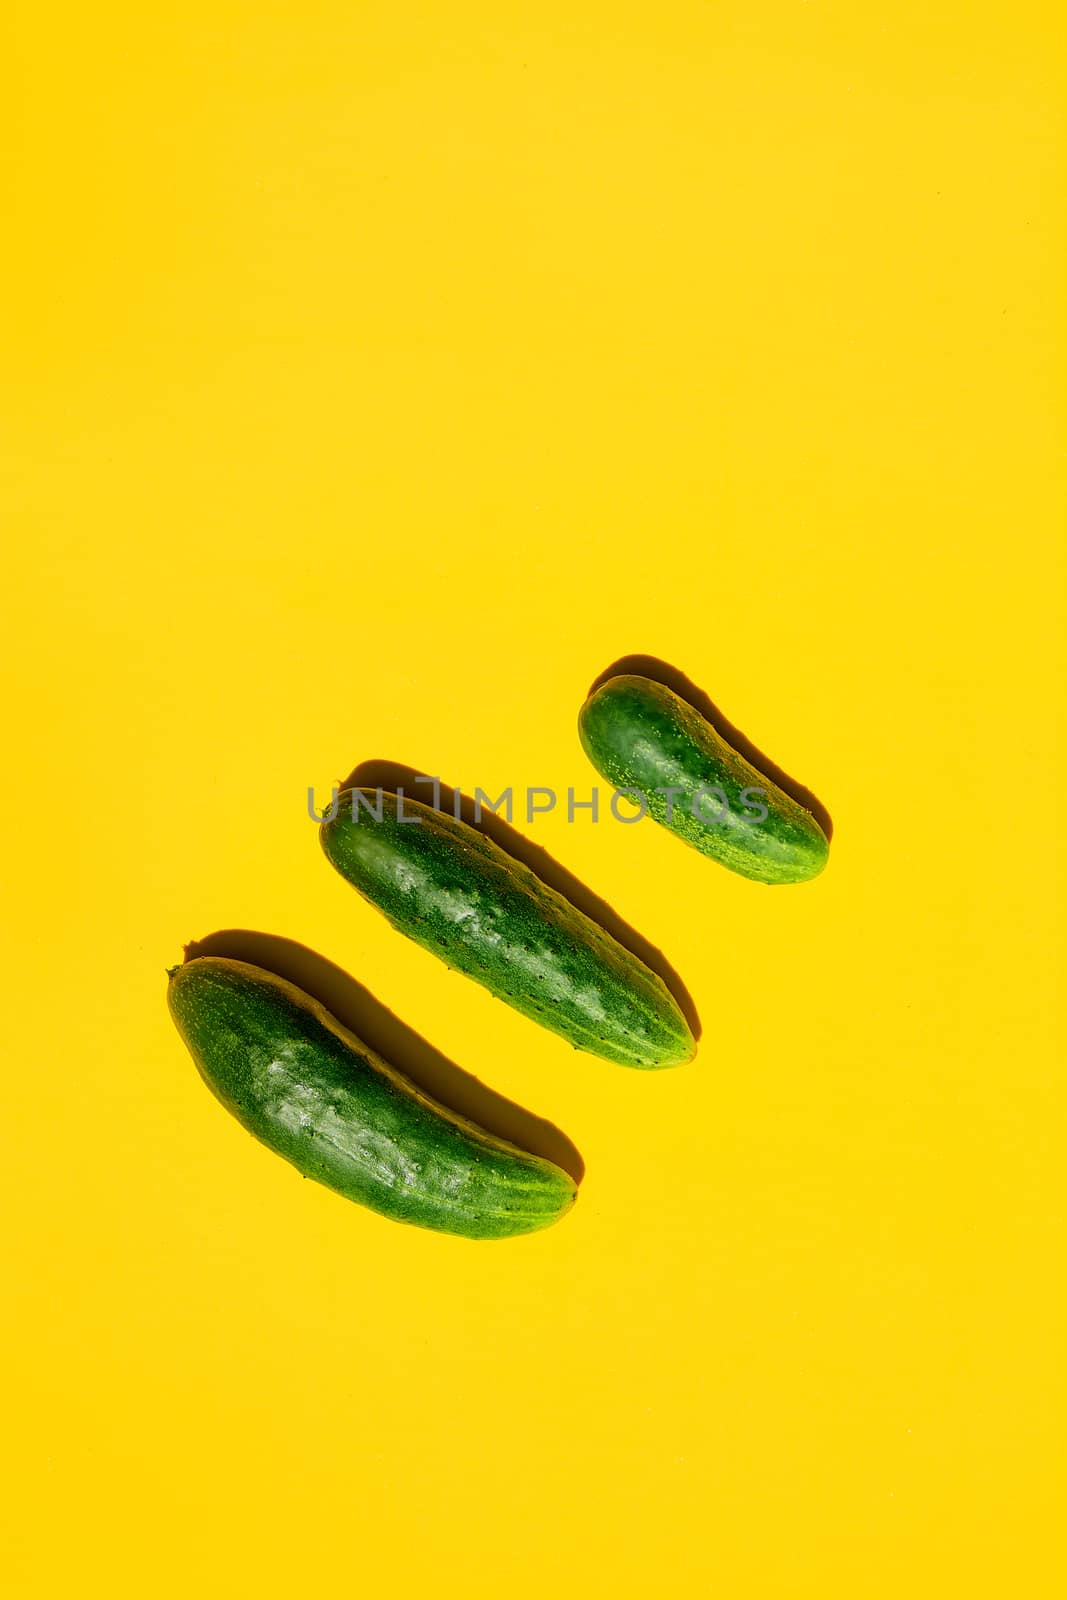 Concept Cucumbers Family on a yellow background. Dad mom baby. Cucumbers for designers. Top view. Cucumber harvest. Cucumber background. Farming, gardening, agriculture, harvesting and people concept.